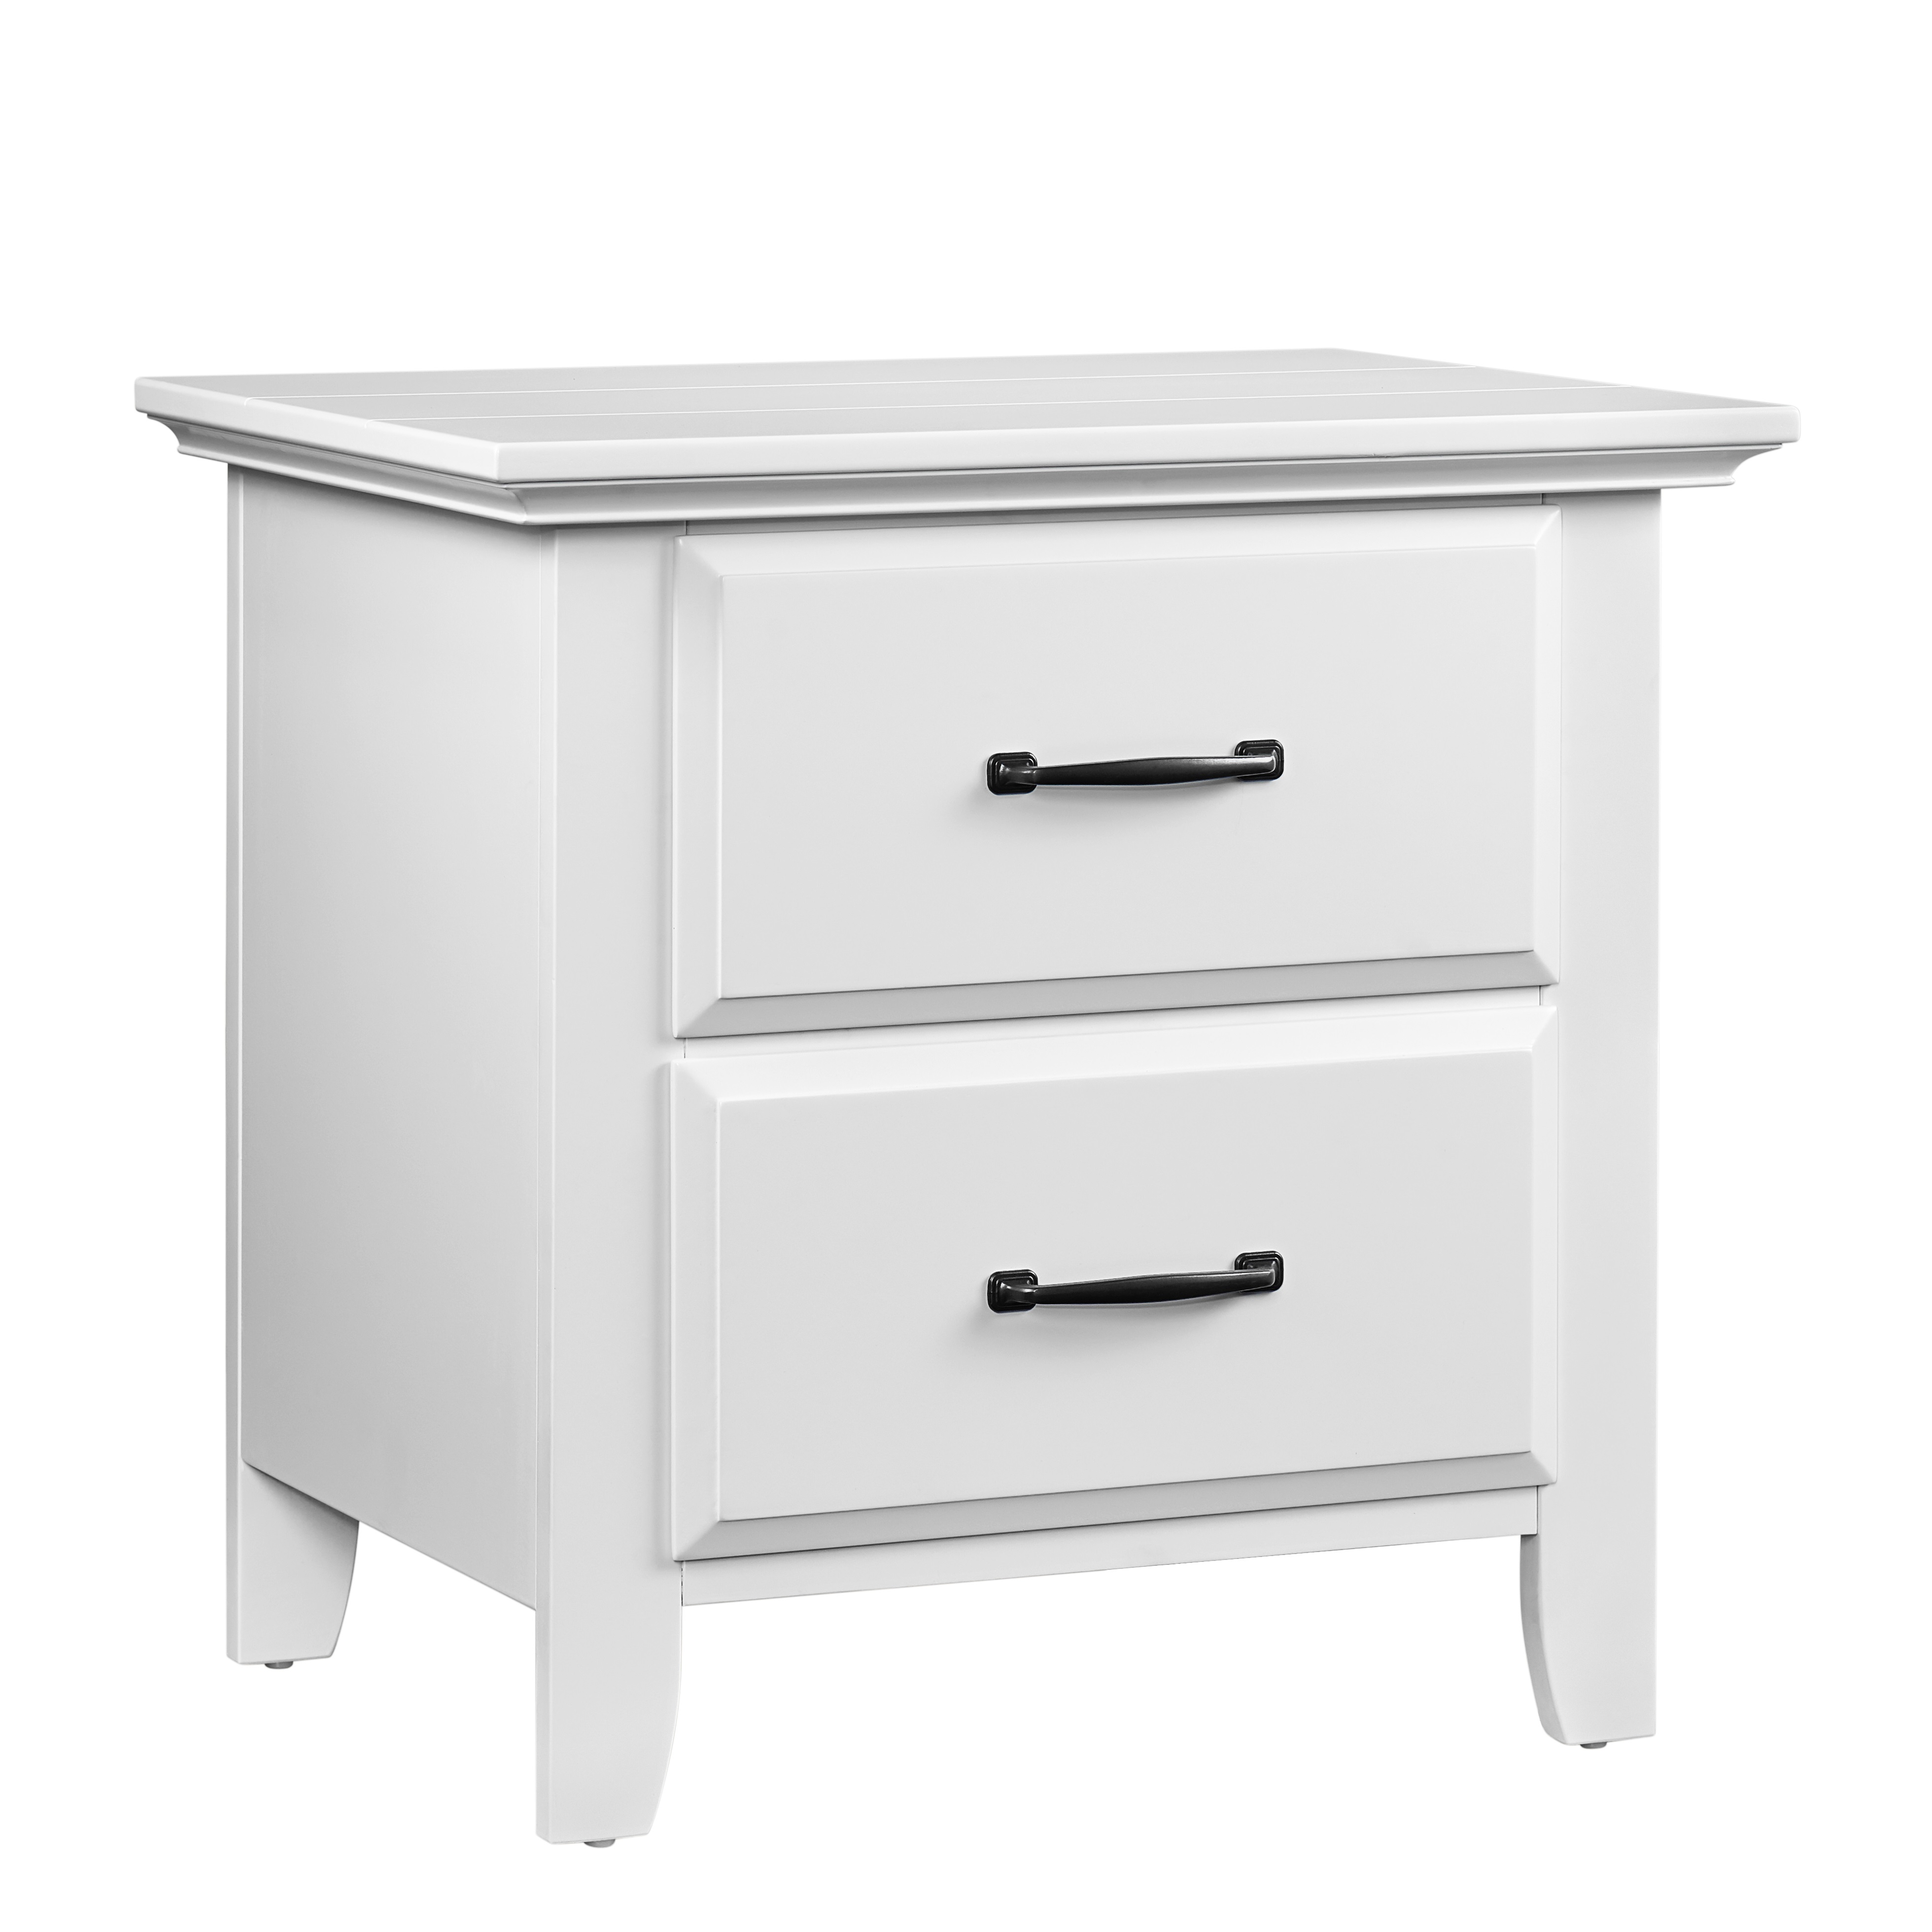 Oxford Baby Willowbrook 2-Drawer Nightstand, White - image 1 of 5